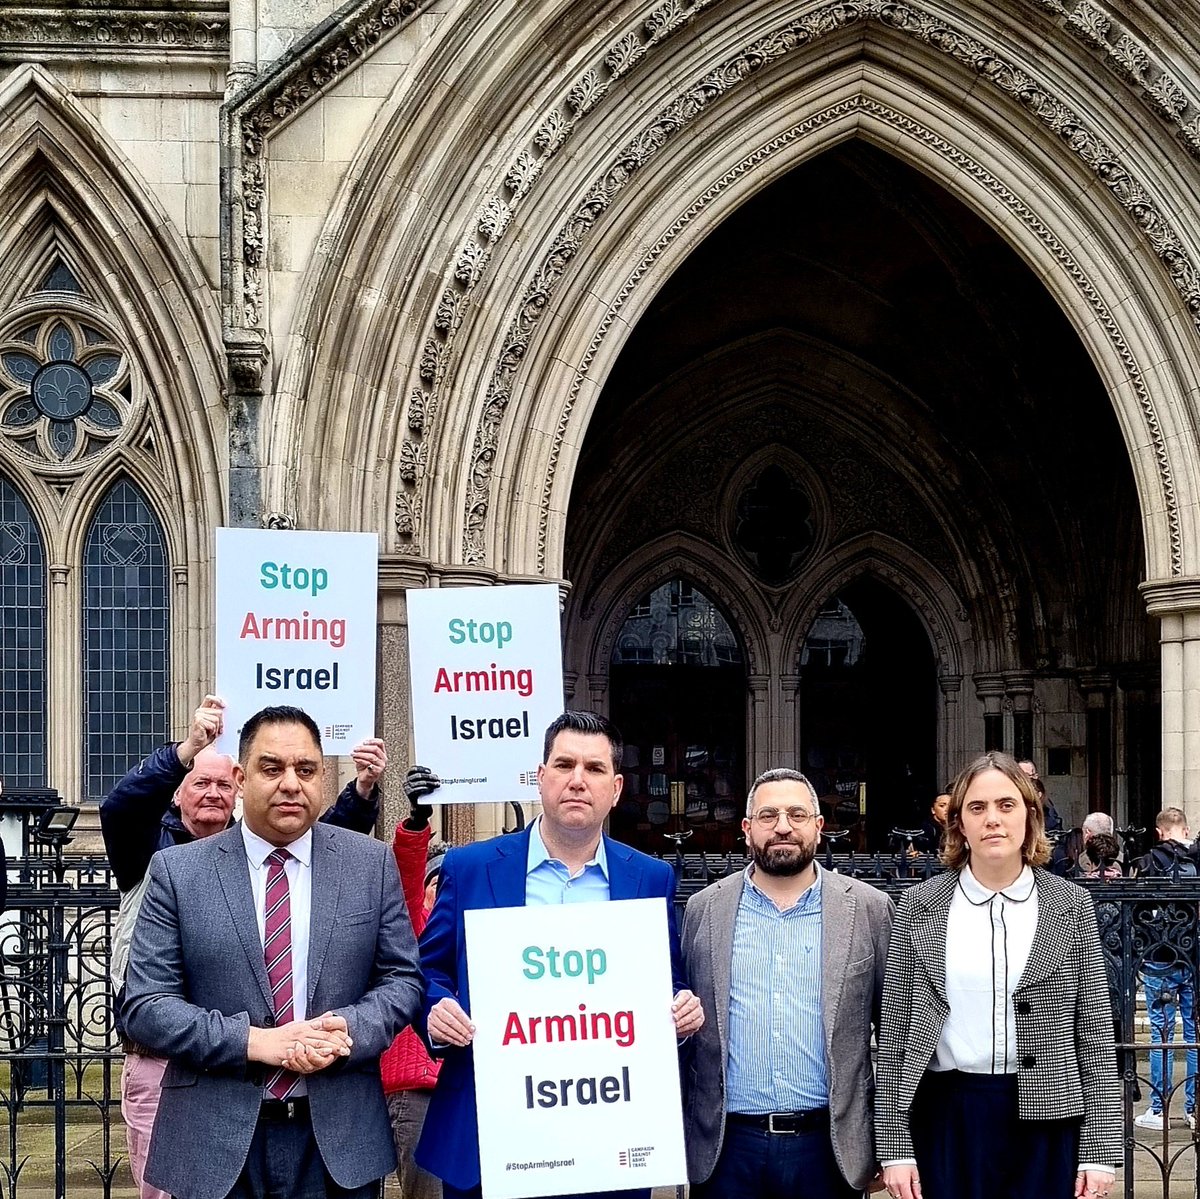 Today at the High Court, I joined representatives of the legal team taking the UK Government to court over arms exports to Israel. Great to hear that @glan_law & Palestinian rights group @alhaq have now been granted a full judicial review hearing at the High Court!